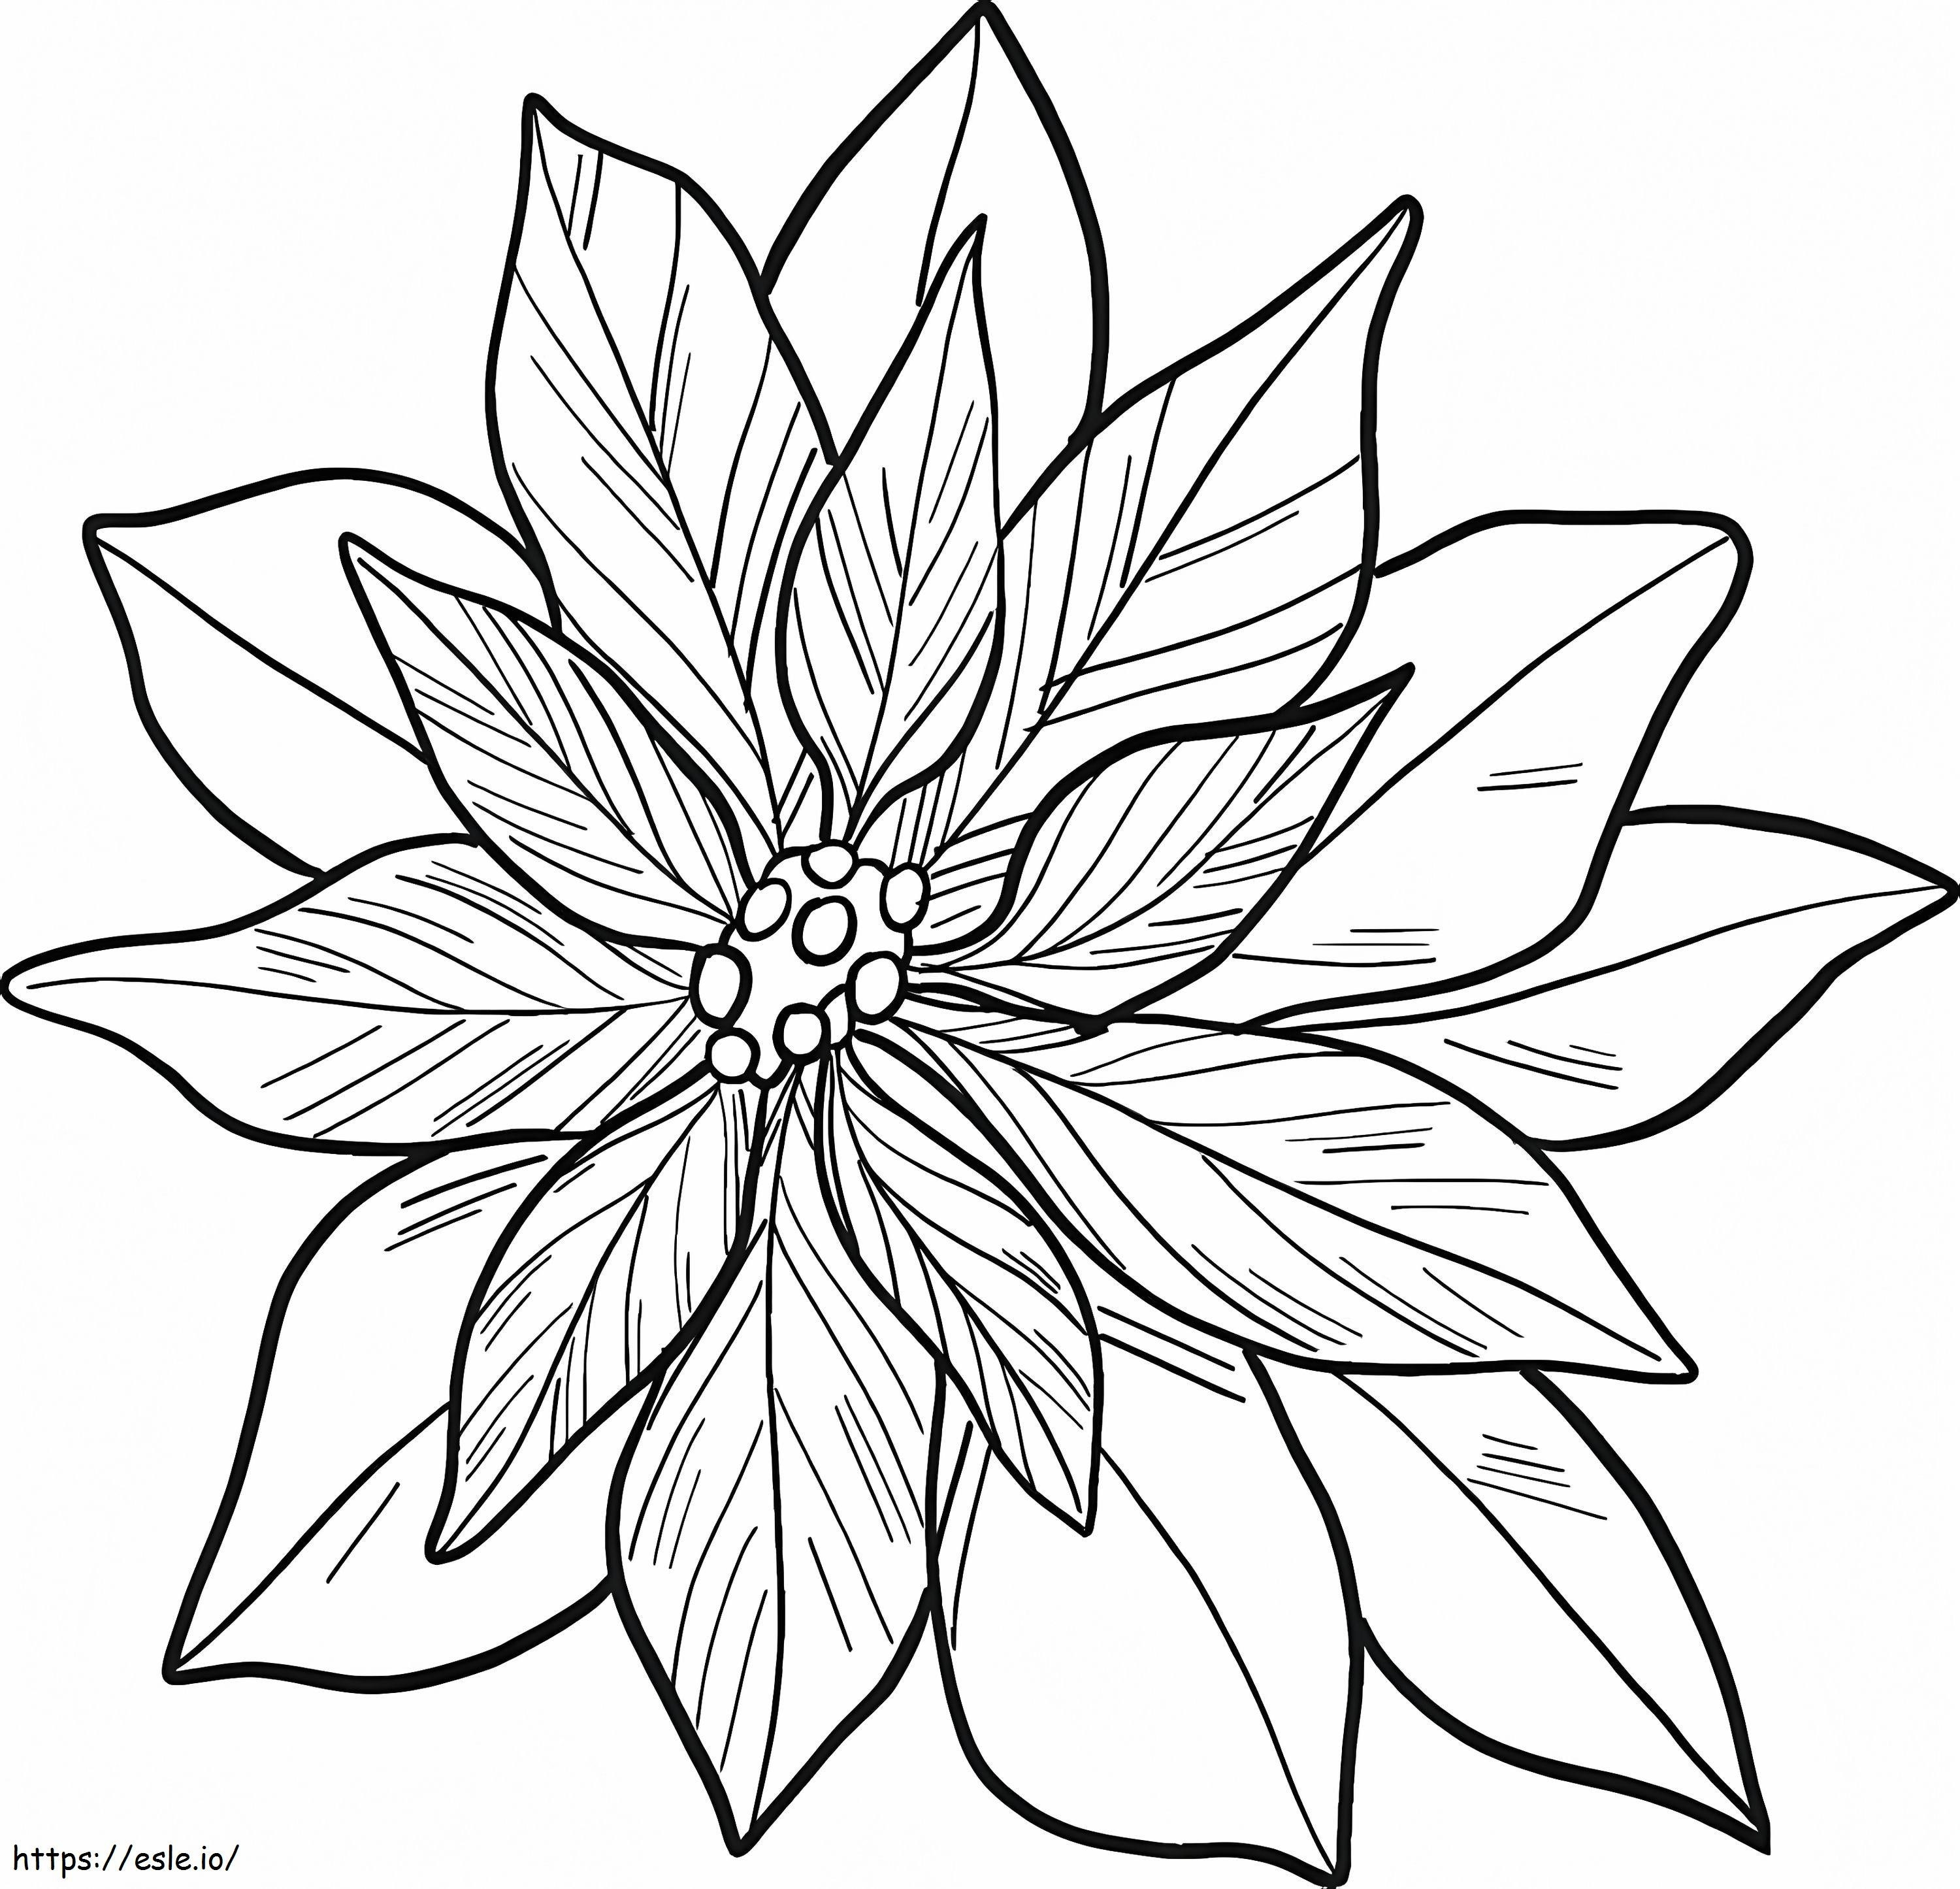 Poinsettia Flower To Print coloring page